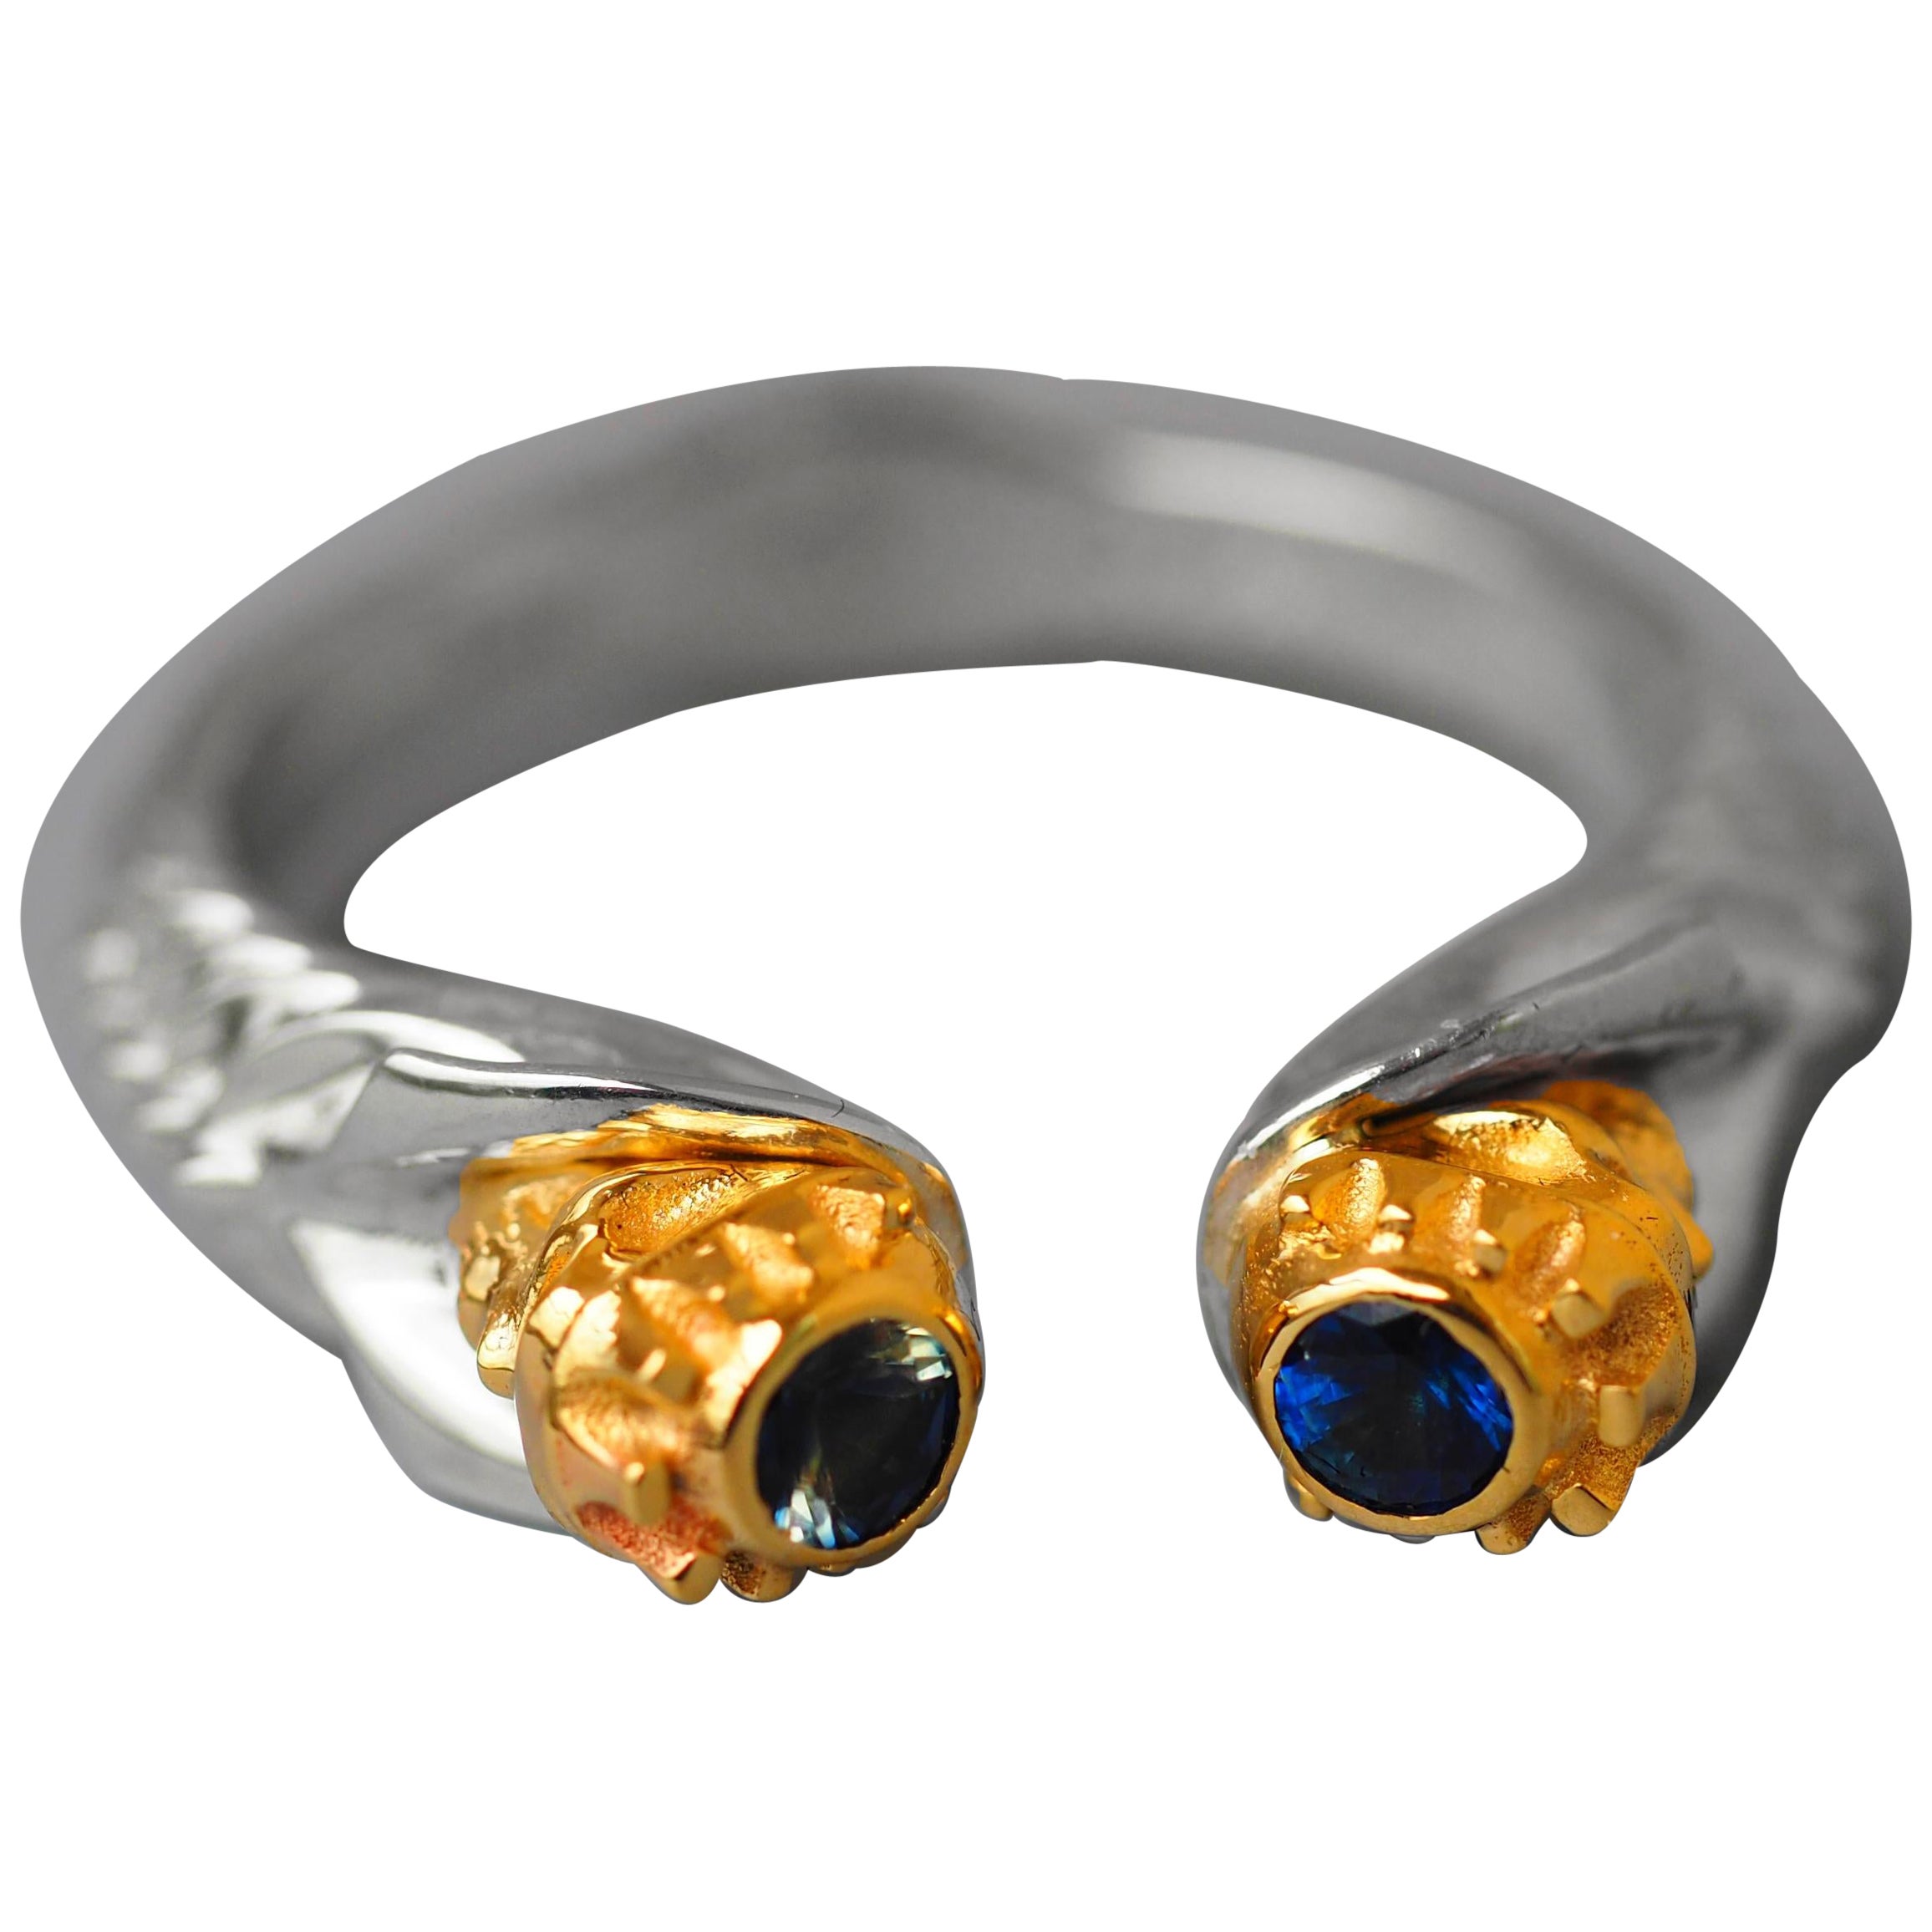 Skull ring with blue sapphires. 